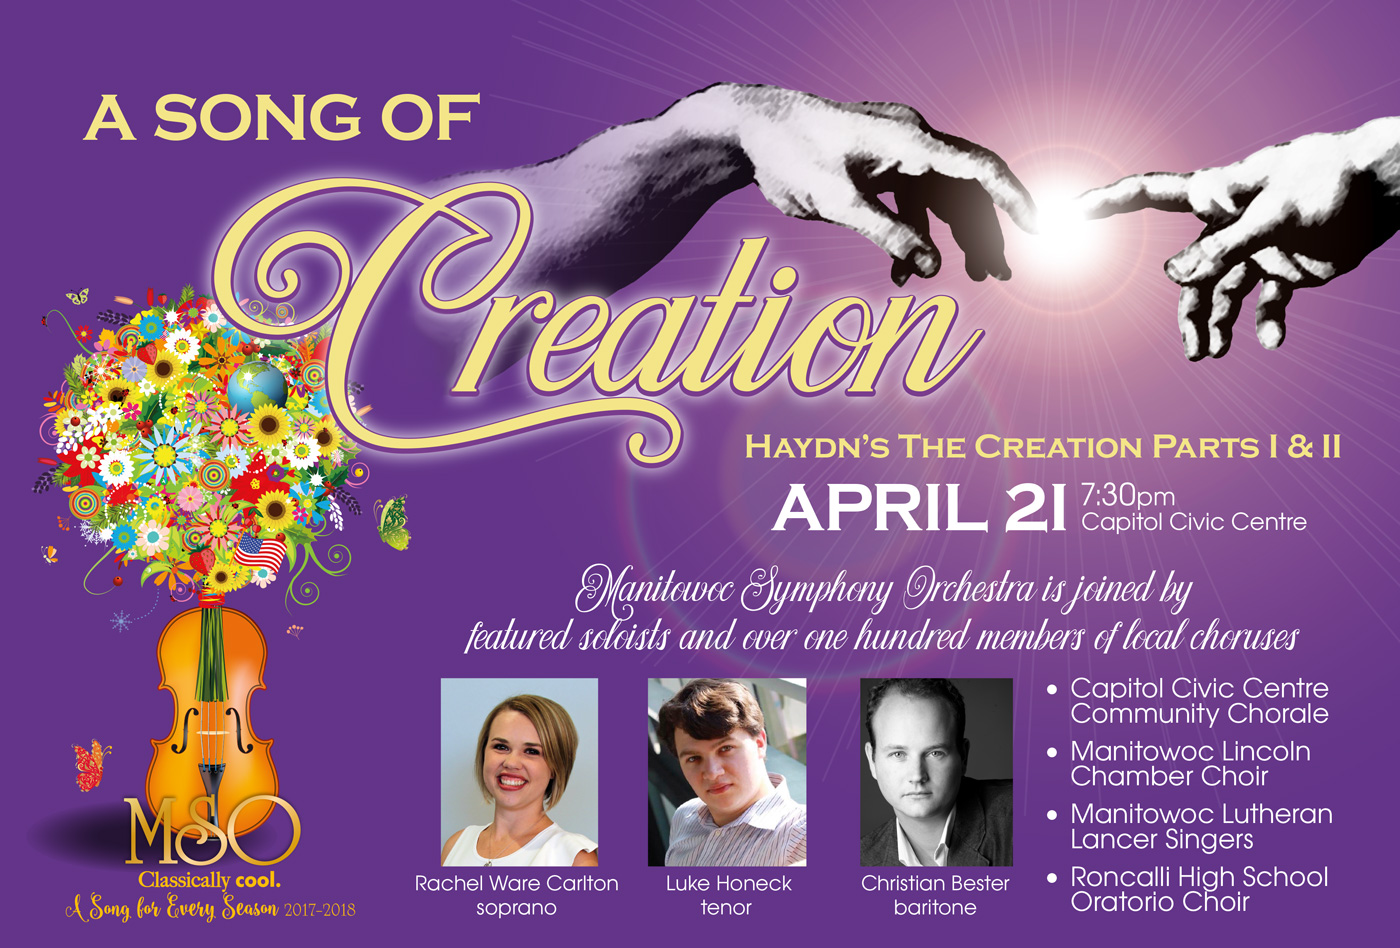 Song of creation poster with Adam's and God's hands touching from the Michelangelo painting and 3 photos of guest soloists. The season graphic of a violin with a colorful and fun bouquet full of flowers, creatures, and beauty at the left.